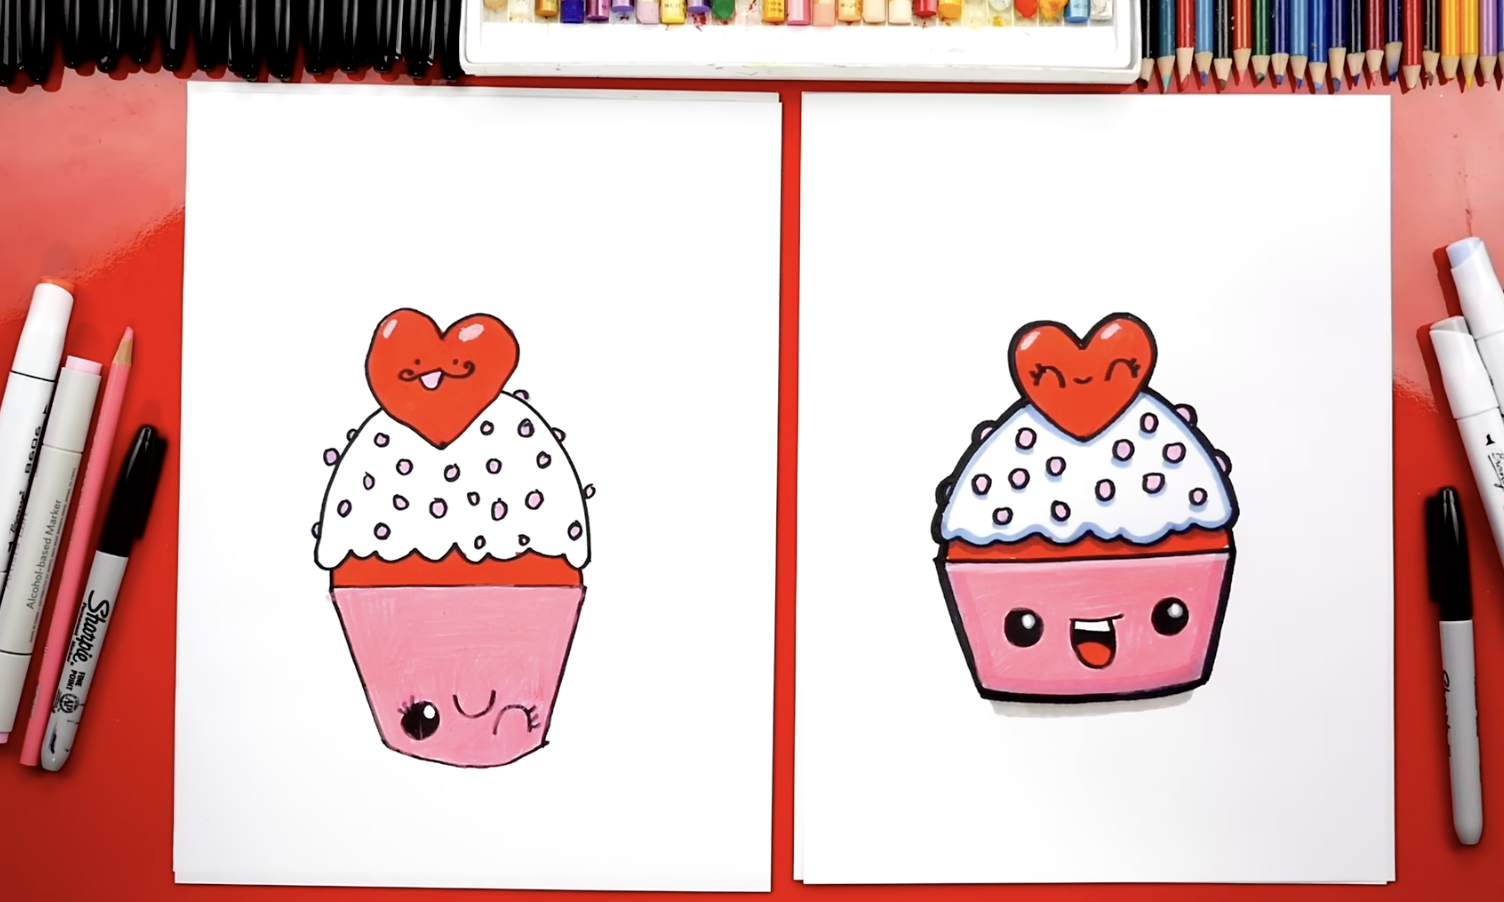 This image shows a simple directed drawing you can try with your students at your Valentine's Day party! 